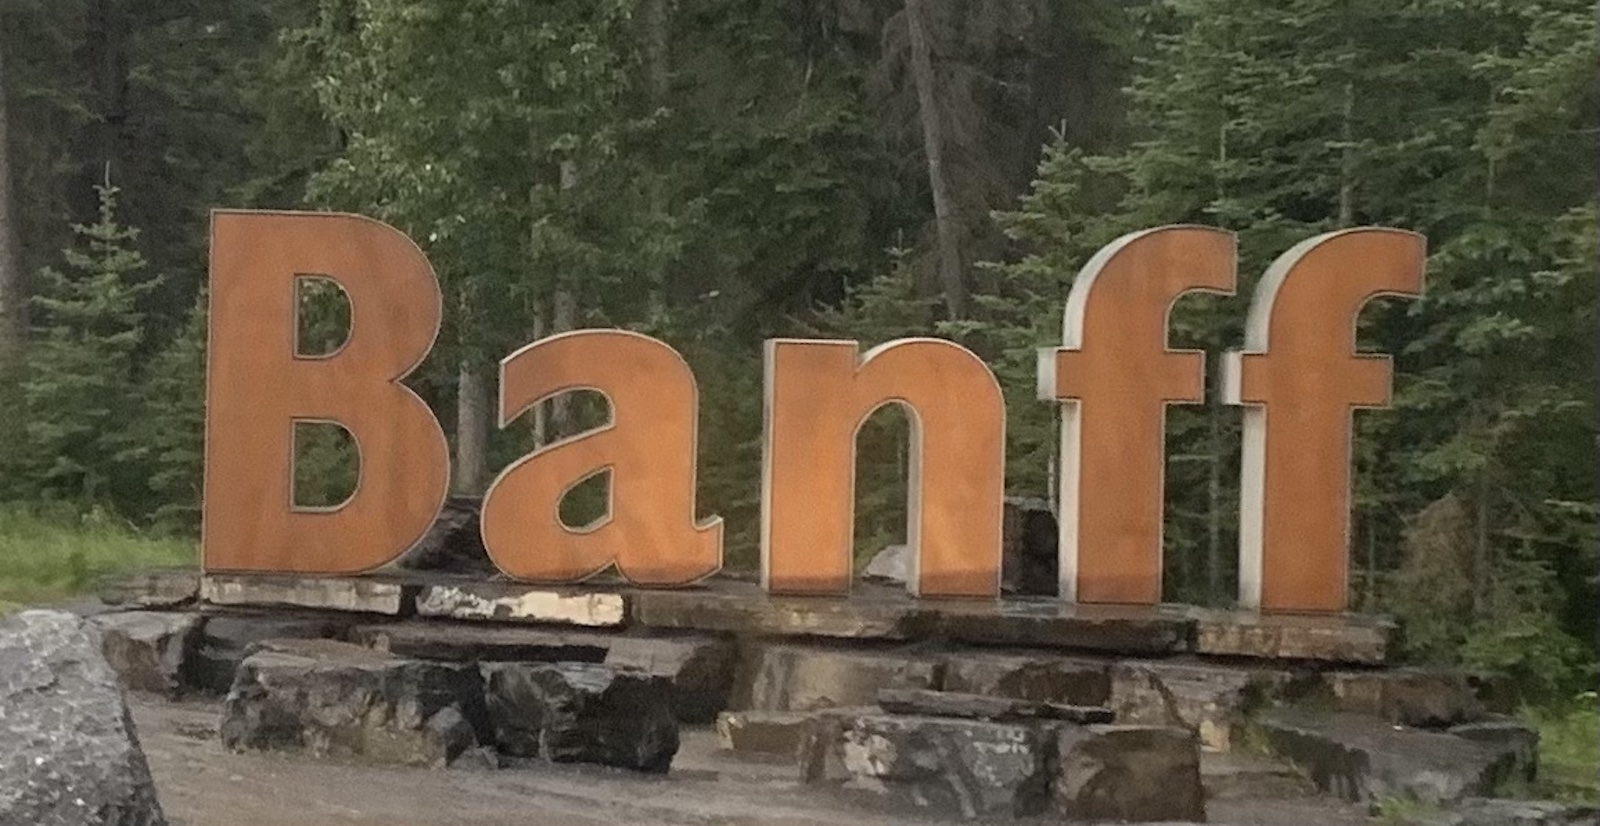 RV Rental Near Banff National Park – How To + My Experience